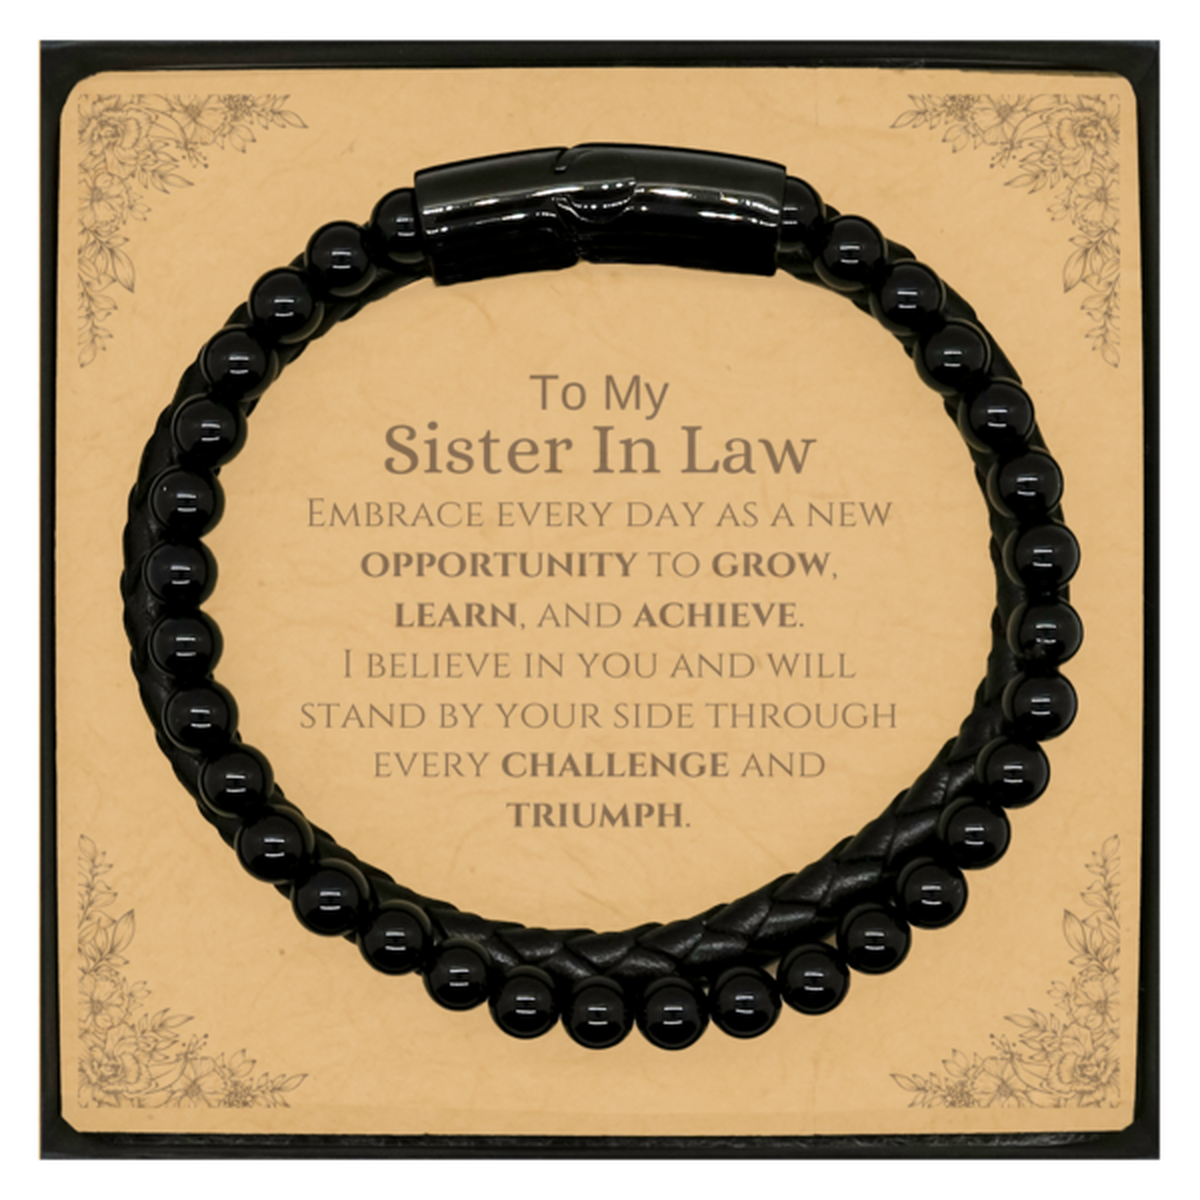 To My Sister In Law Gifts, I believe in you and will stand by your side, Inspirational Stone Leather Bracelets For Sister In Law, Birthday Christmas Motivational Sister In Law Gifts